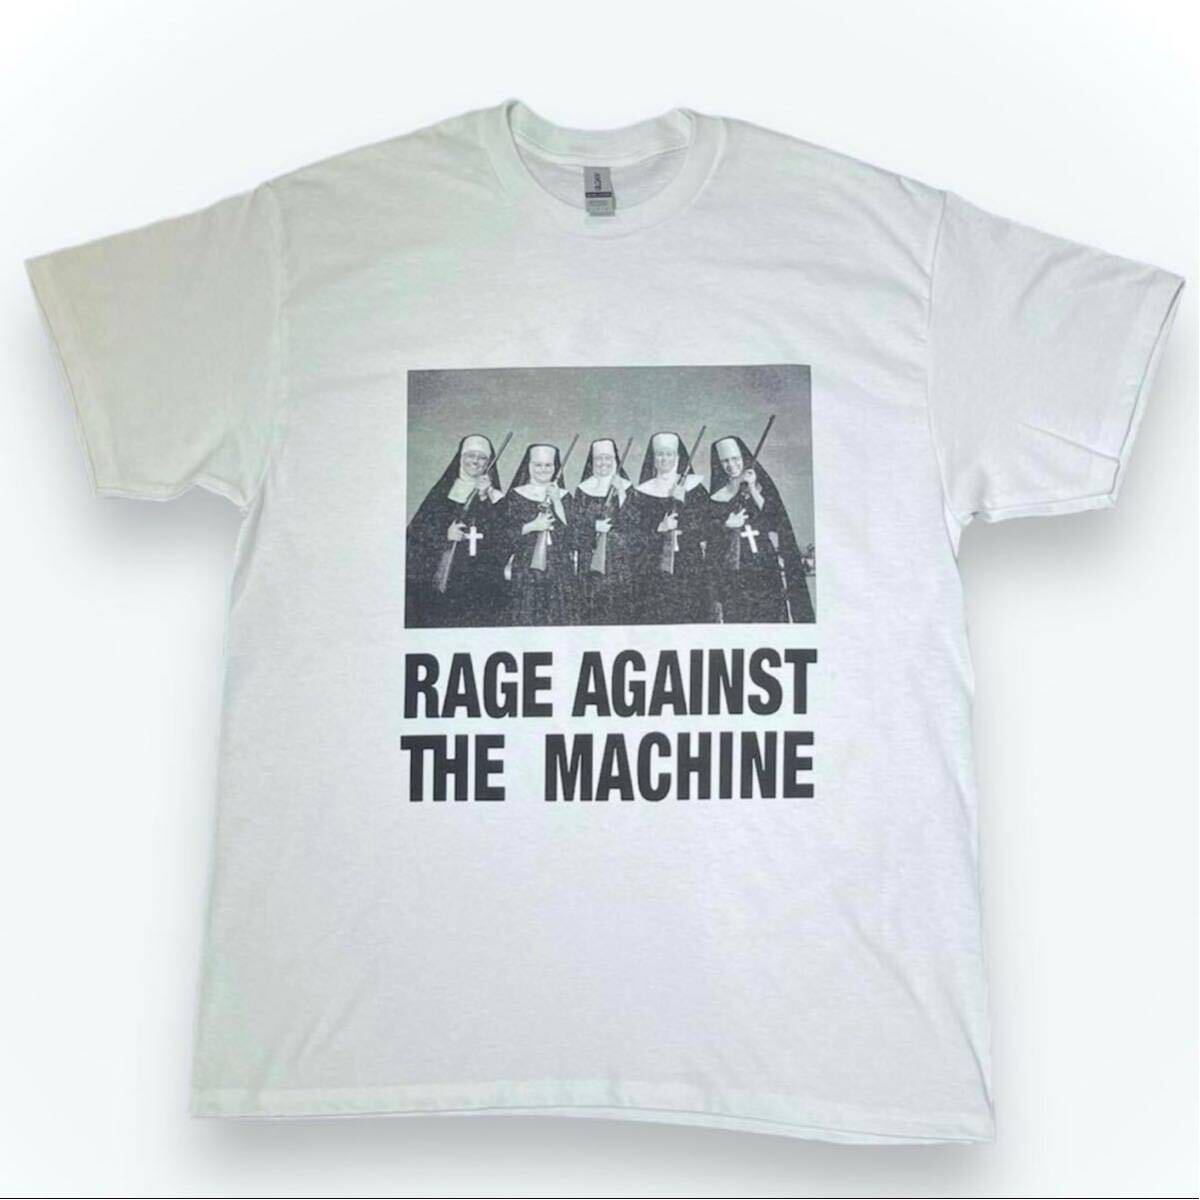 RAGE AGAINST THE MACHINE Tシャツ レイジ アゲインスト ザ マシーン ナンズアンドガンズ 両面プリント バンド 大判 メタリカ 90s 野村訓市_画像2